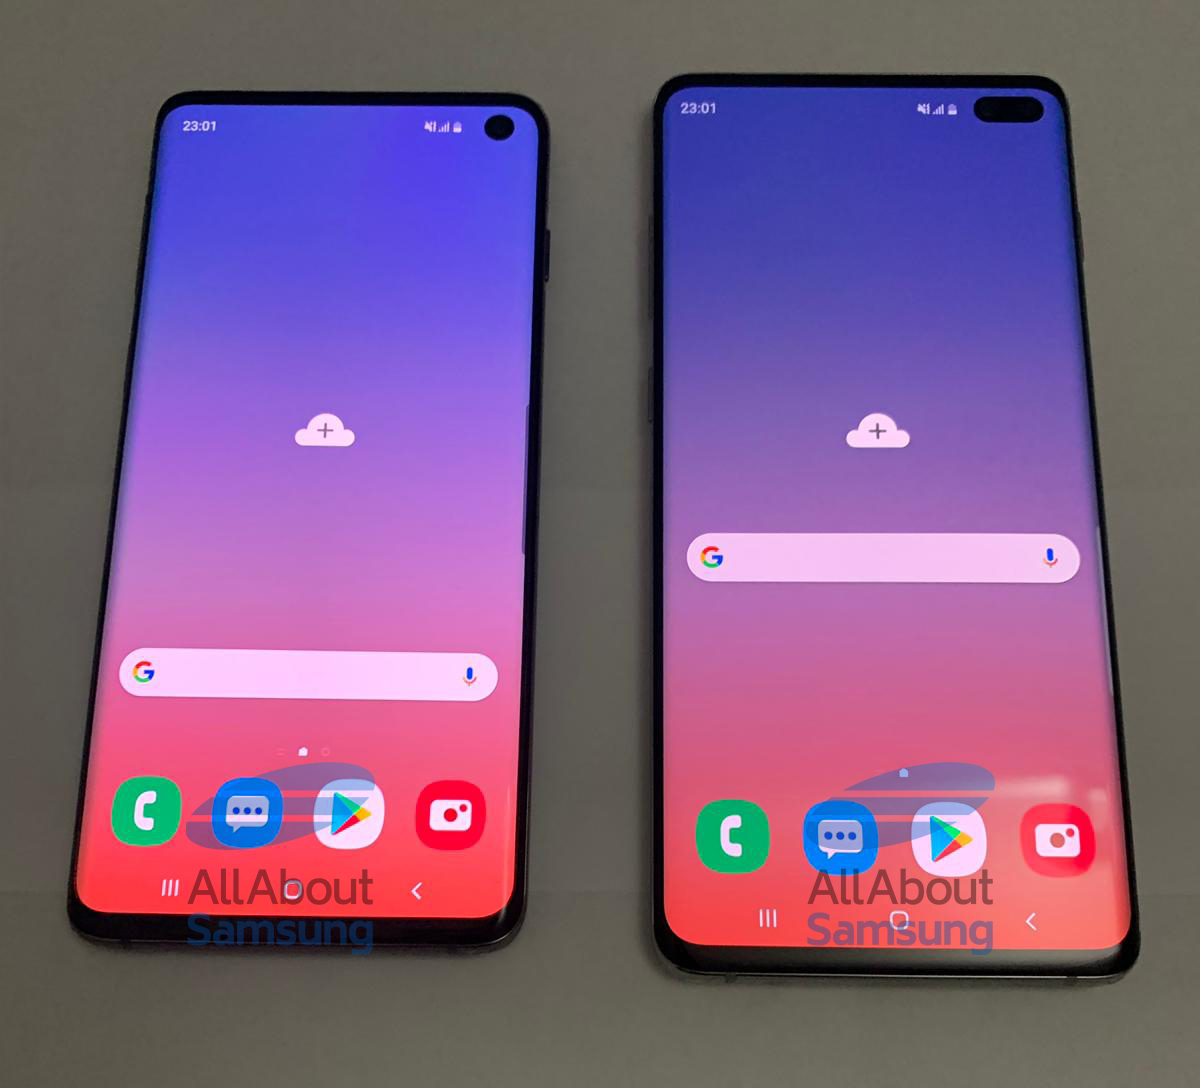 What will the Samsung Galaxy S10 look like?